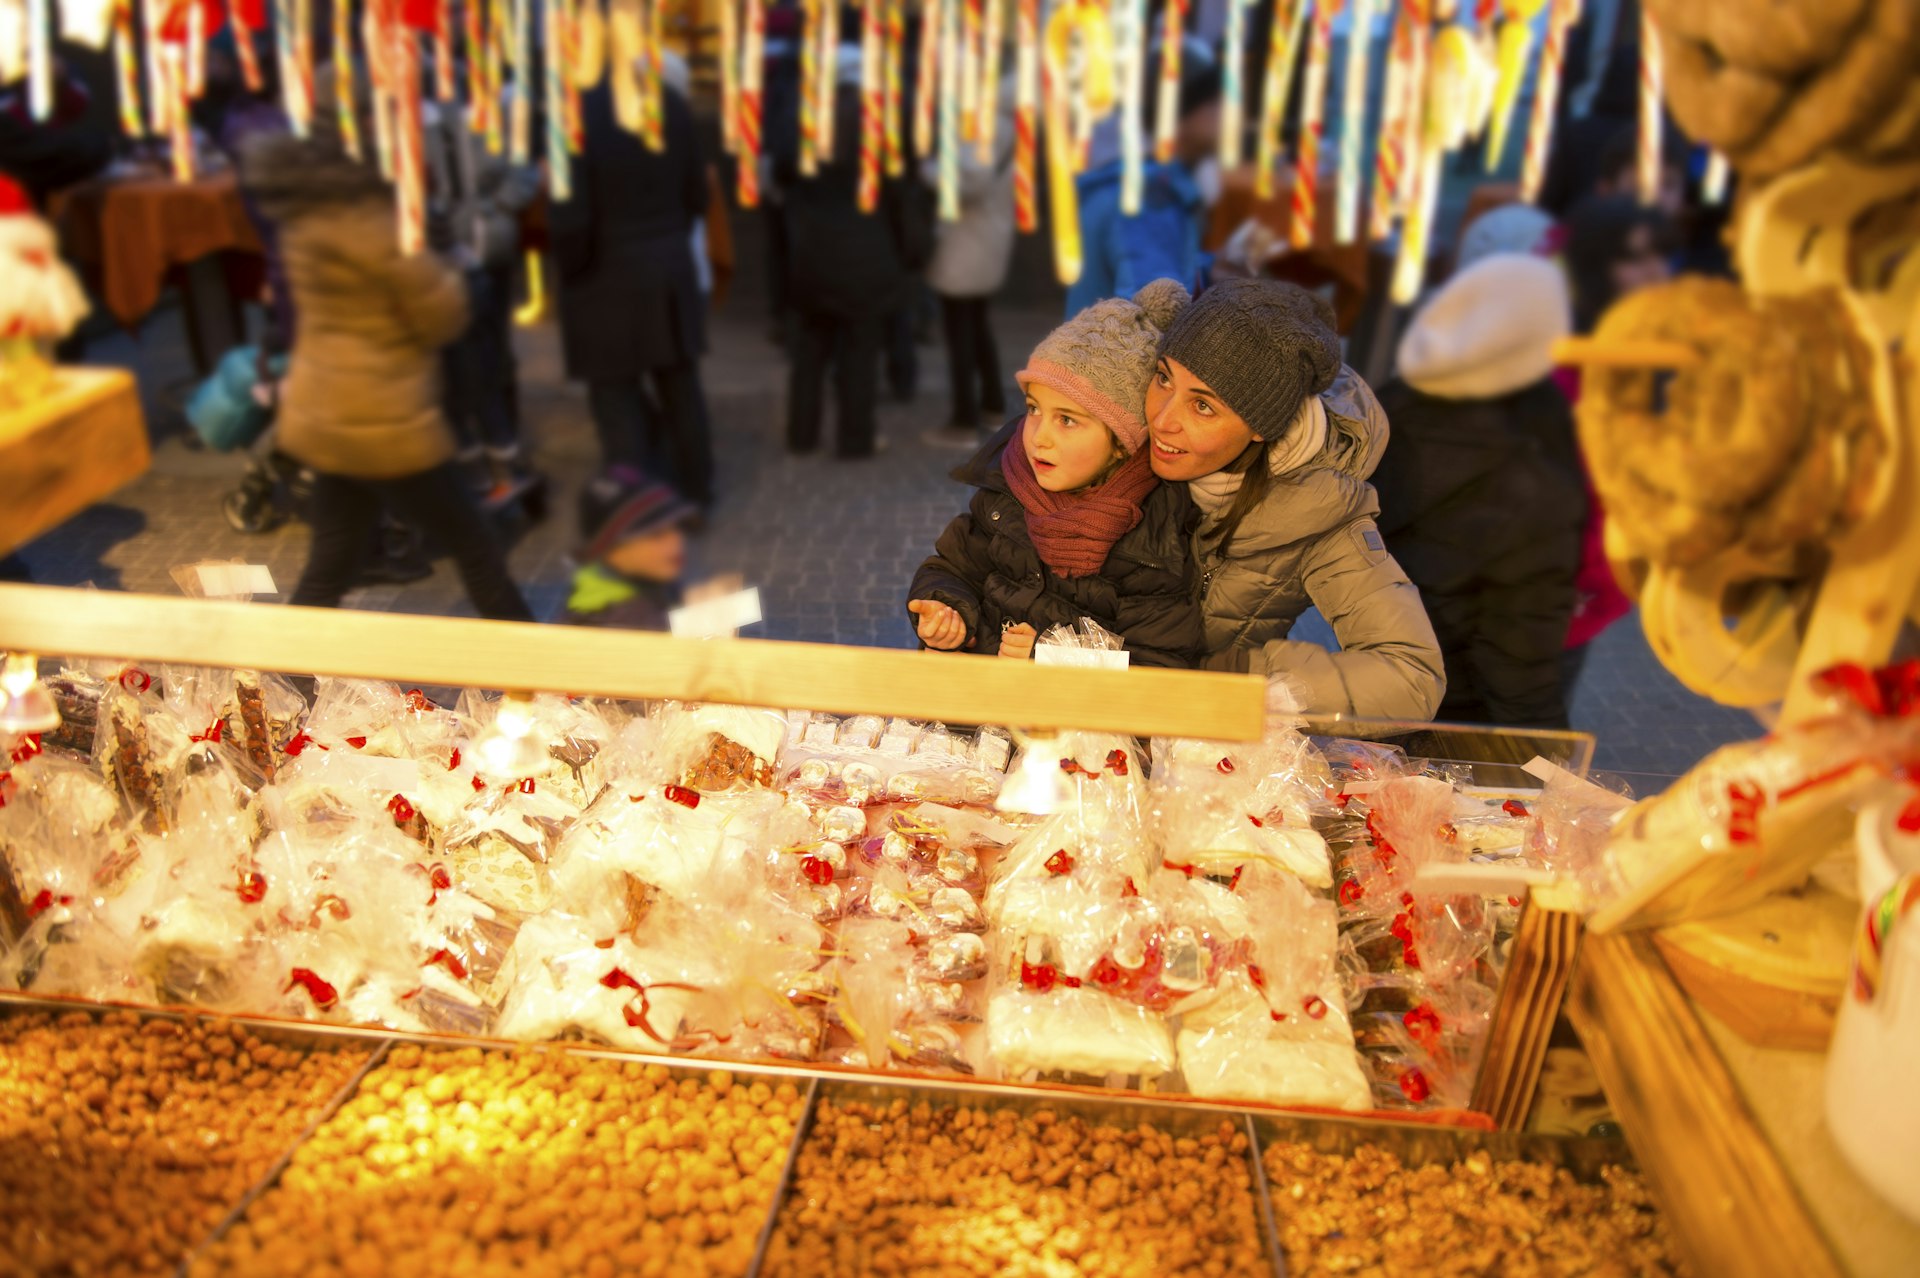 A child stands at a sweet stall at a Christmas market